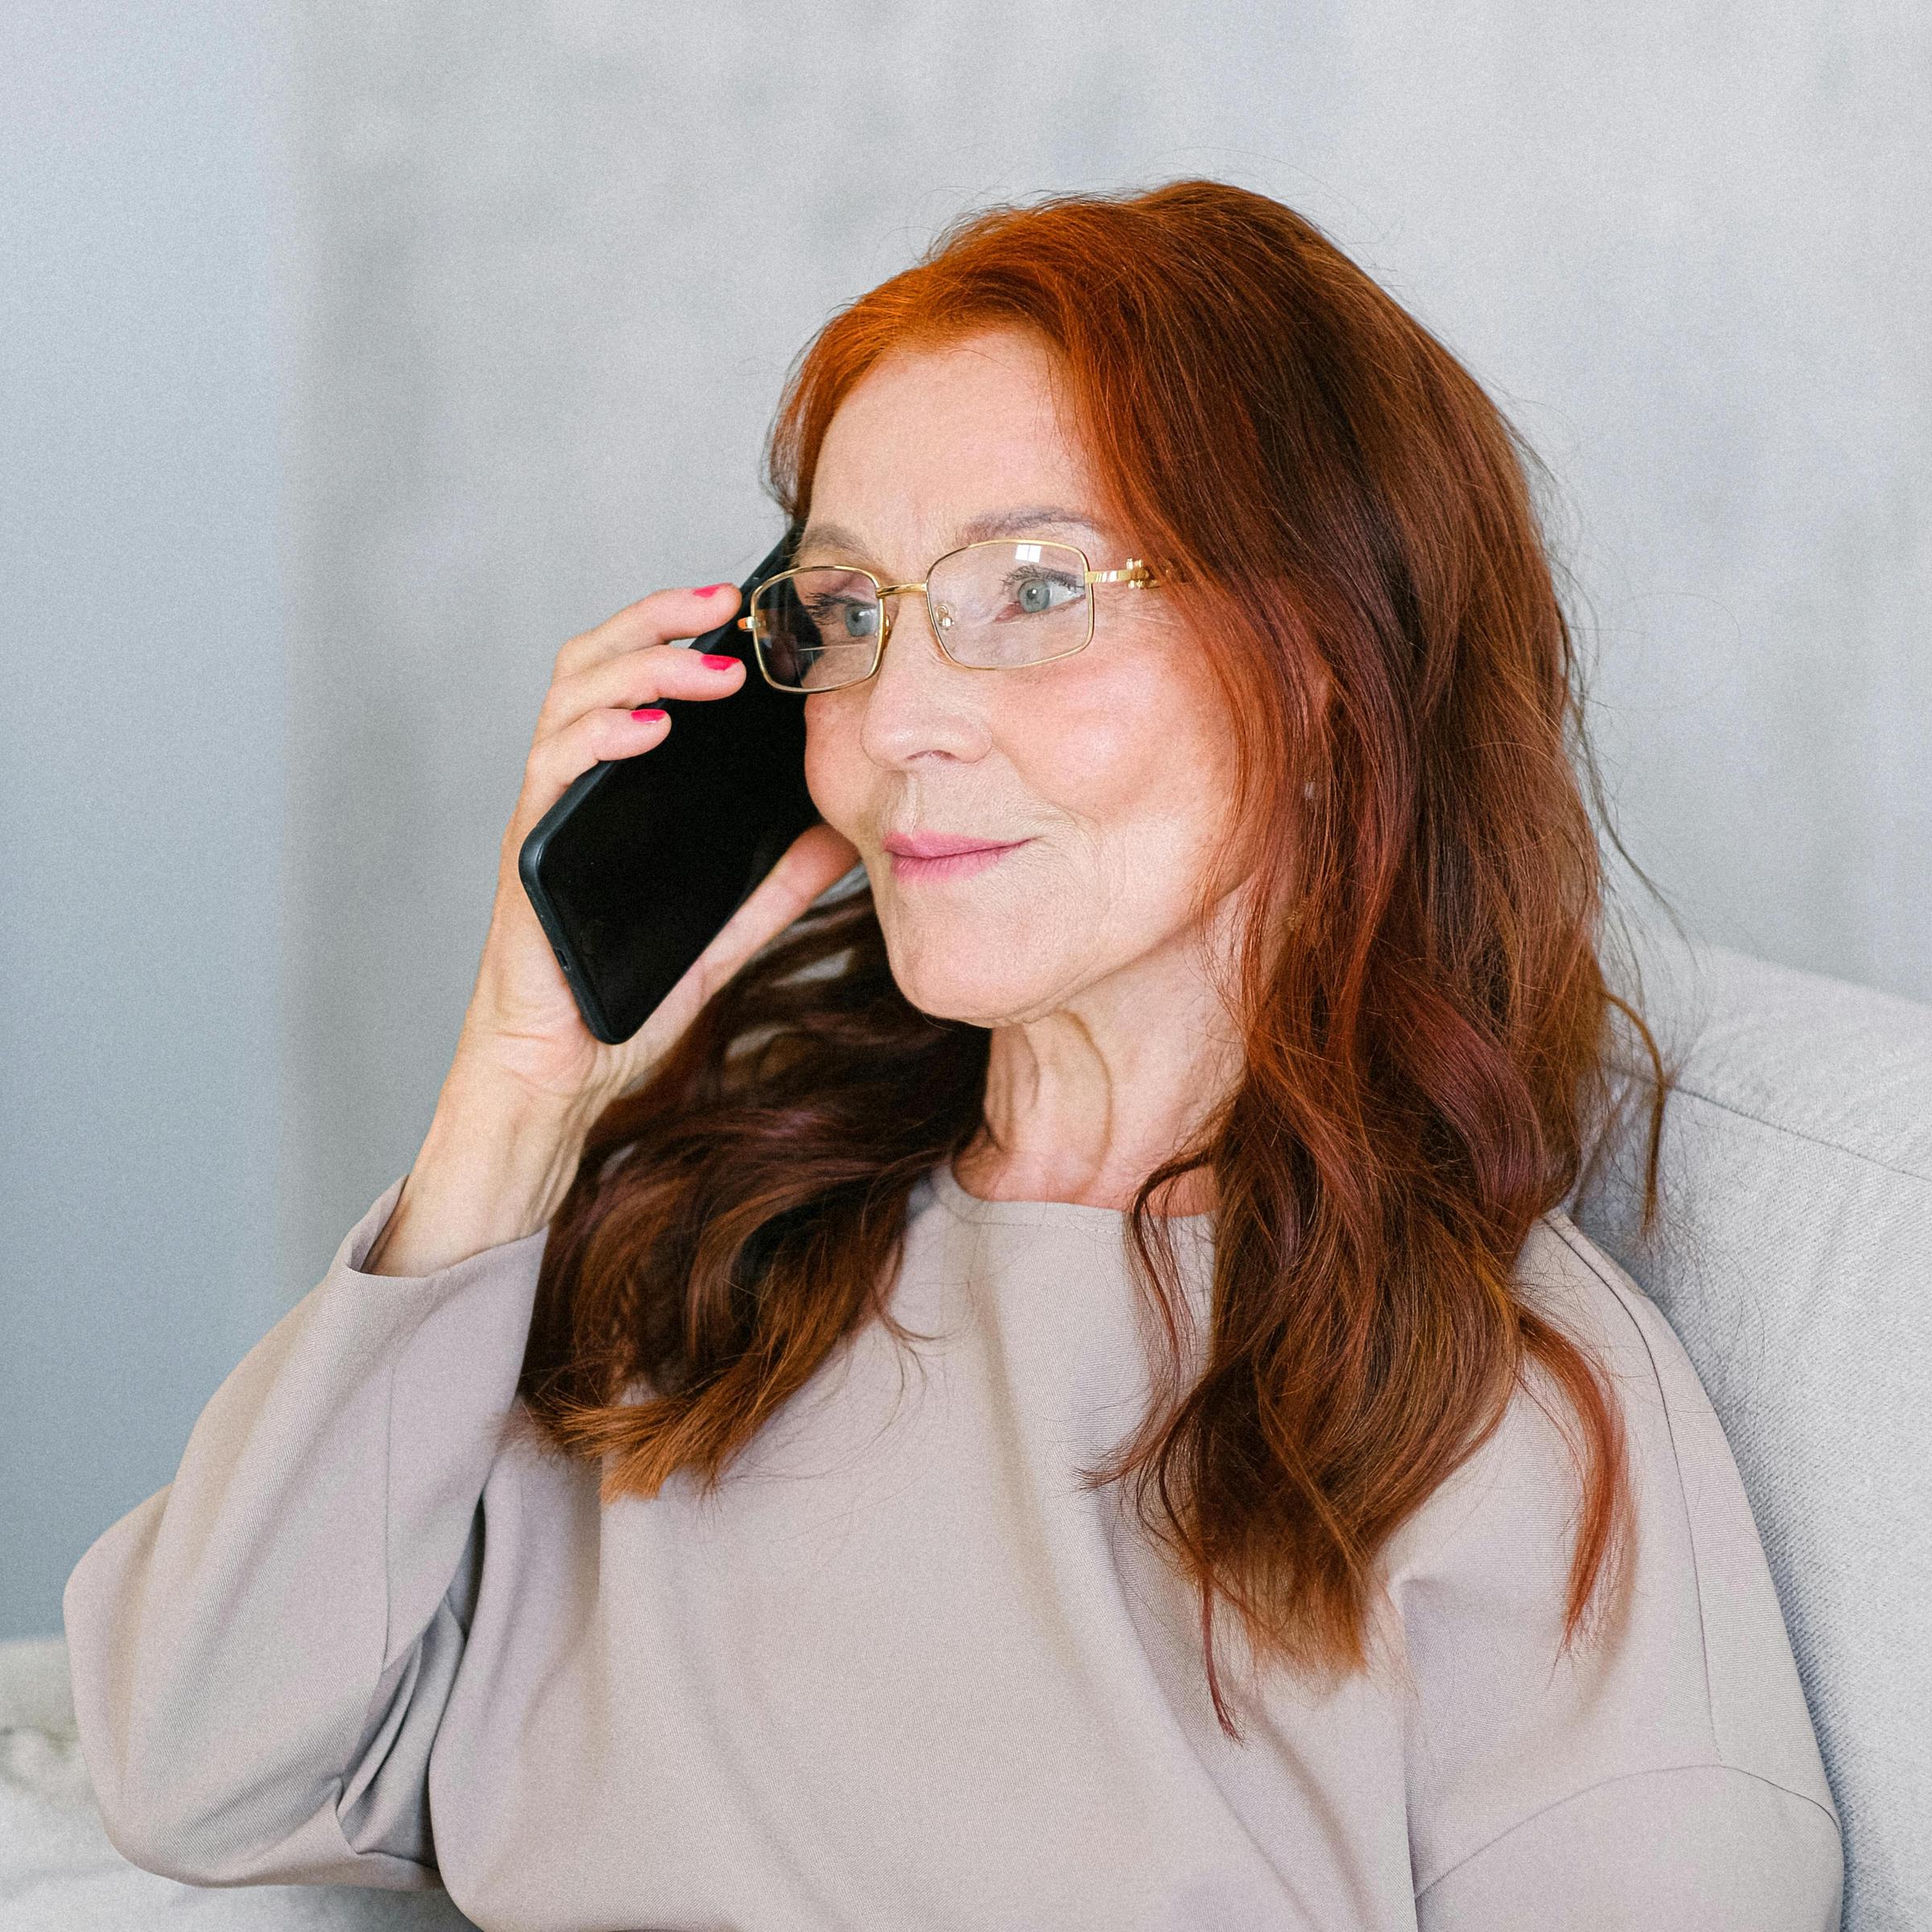 Natalie's MIL calls with an apology on behalf of the family | Source: Pexels